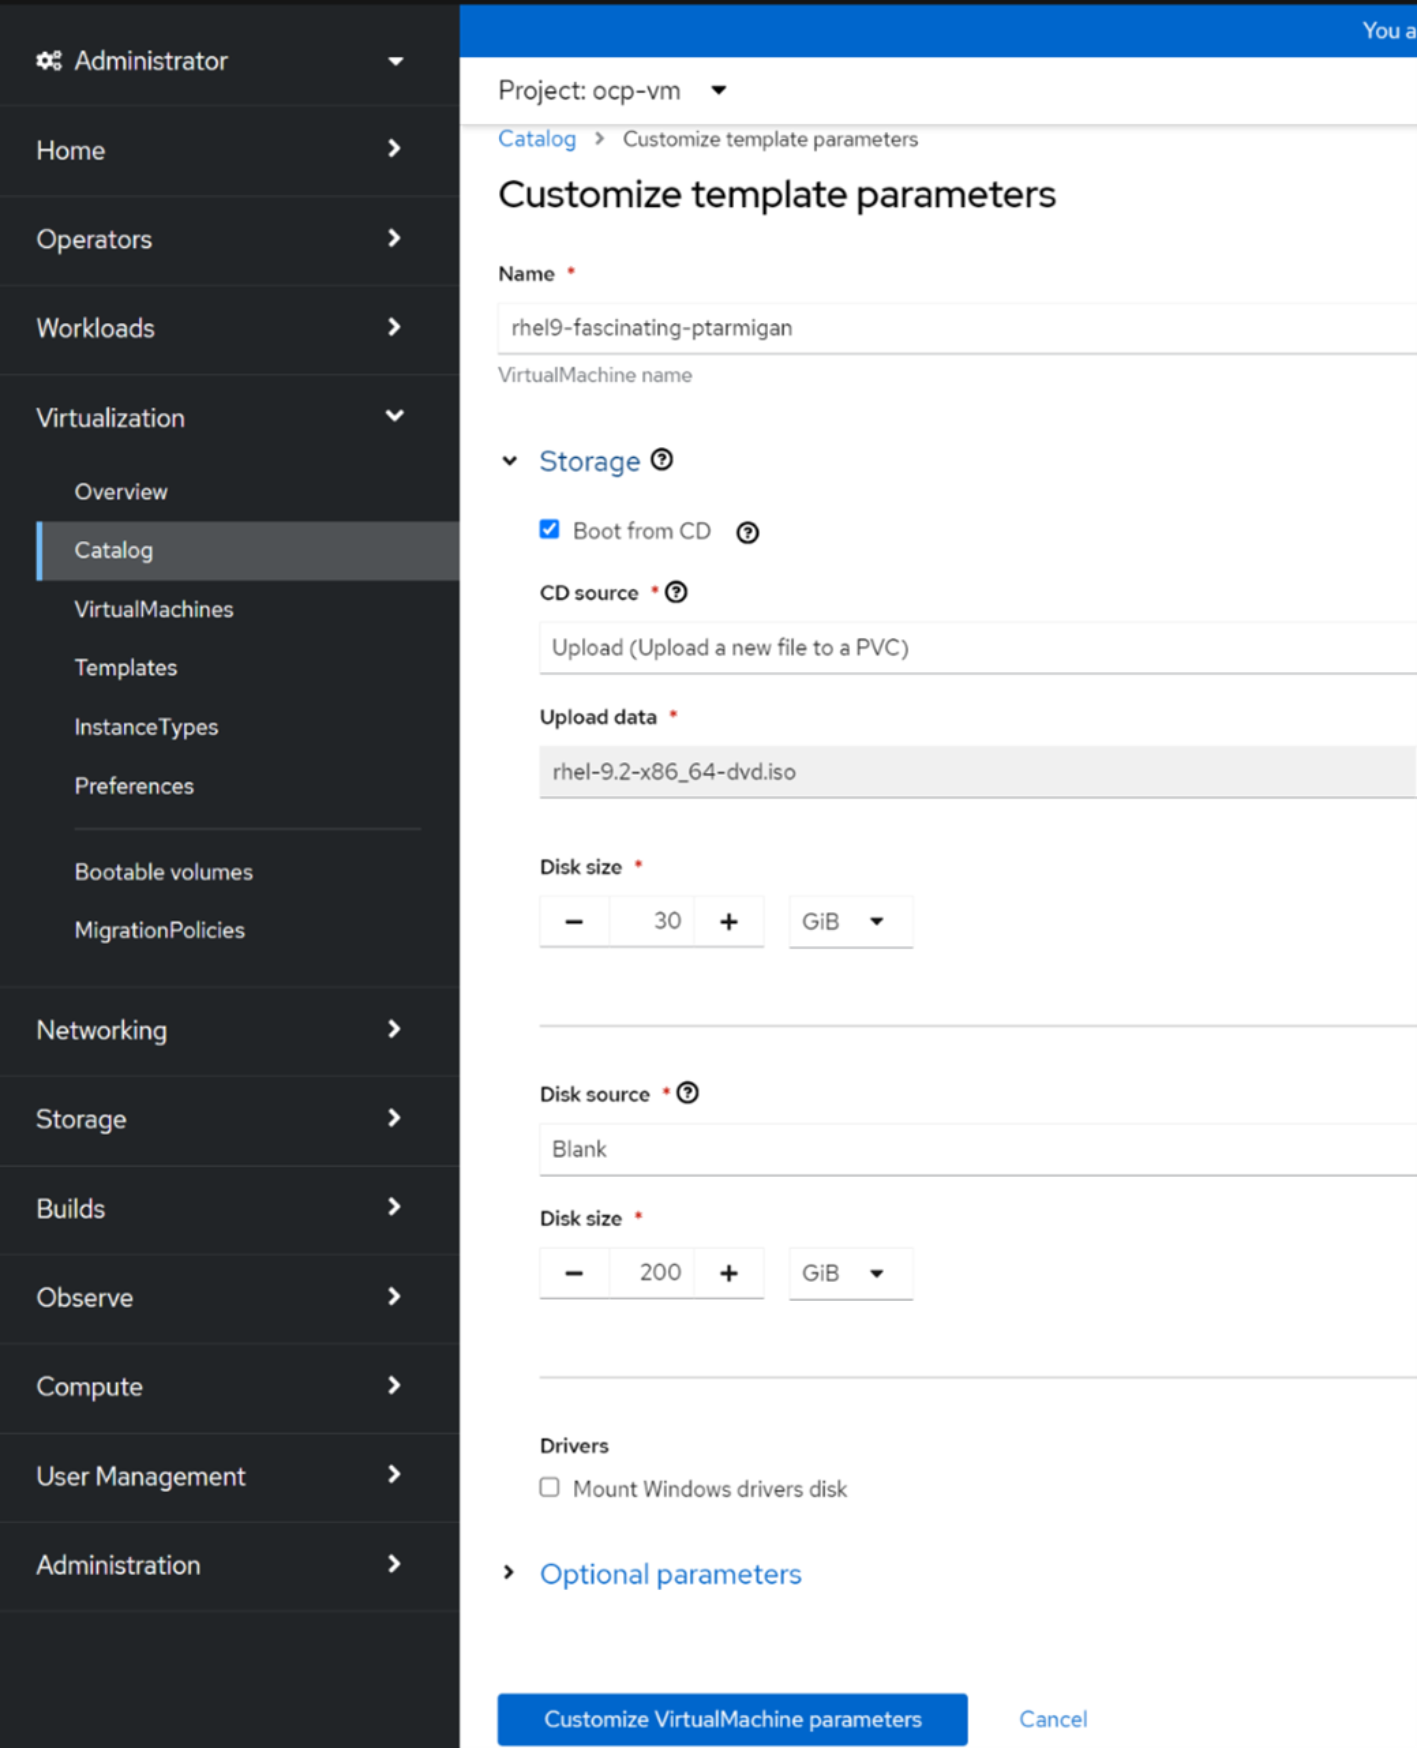 A page displaying information on how to customize template parameters on a VM